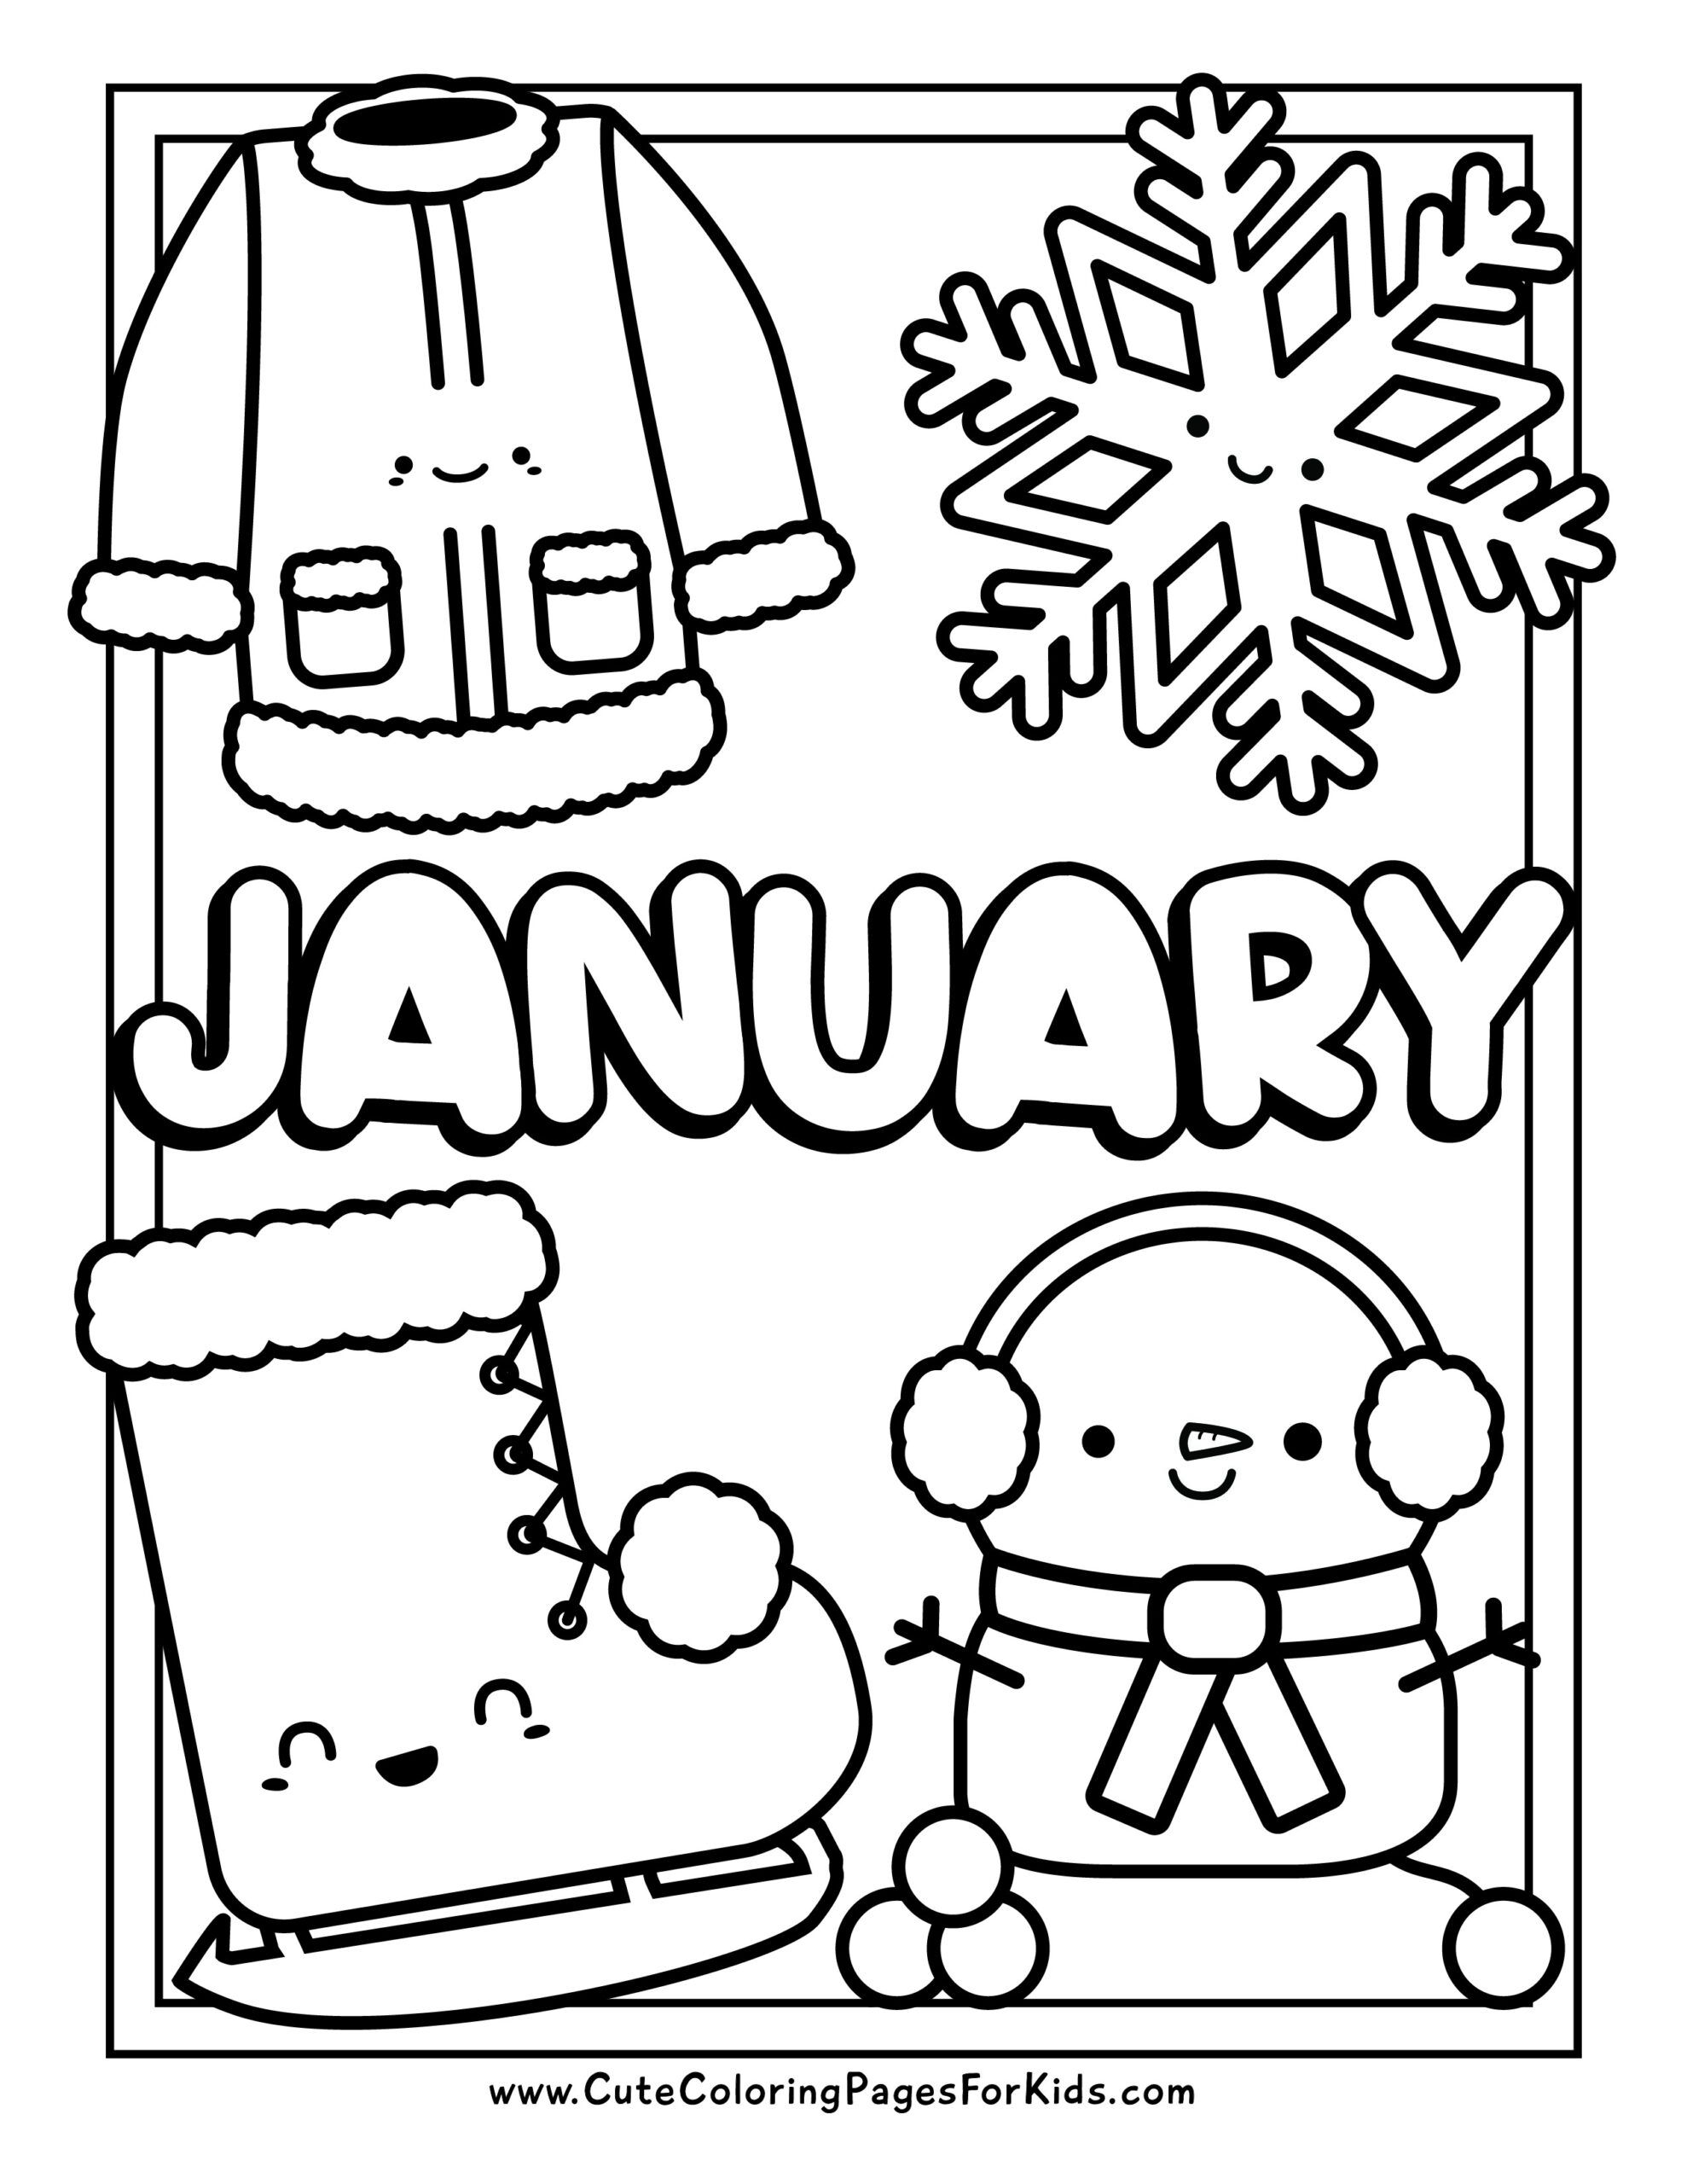 Printable Coloring Pages Archives - Cute Coloring Pages For Kids